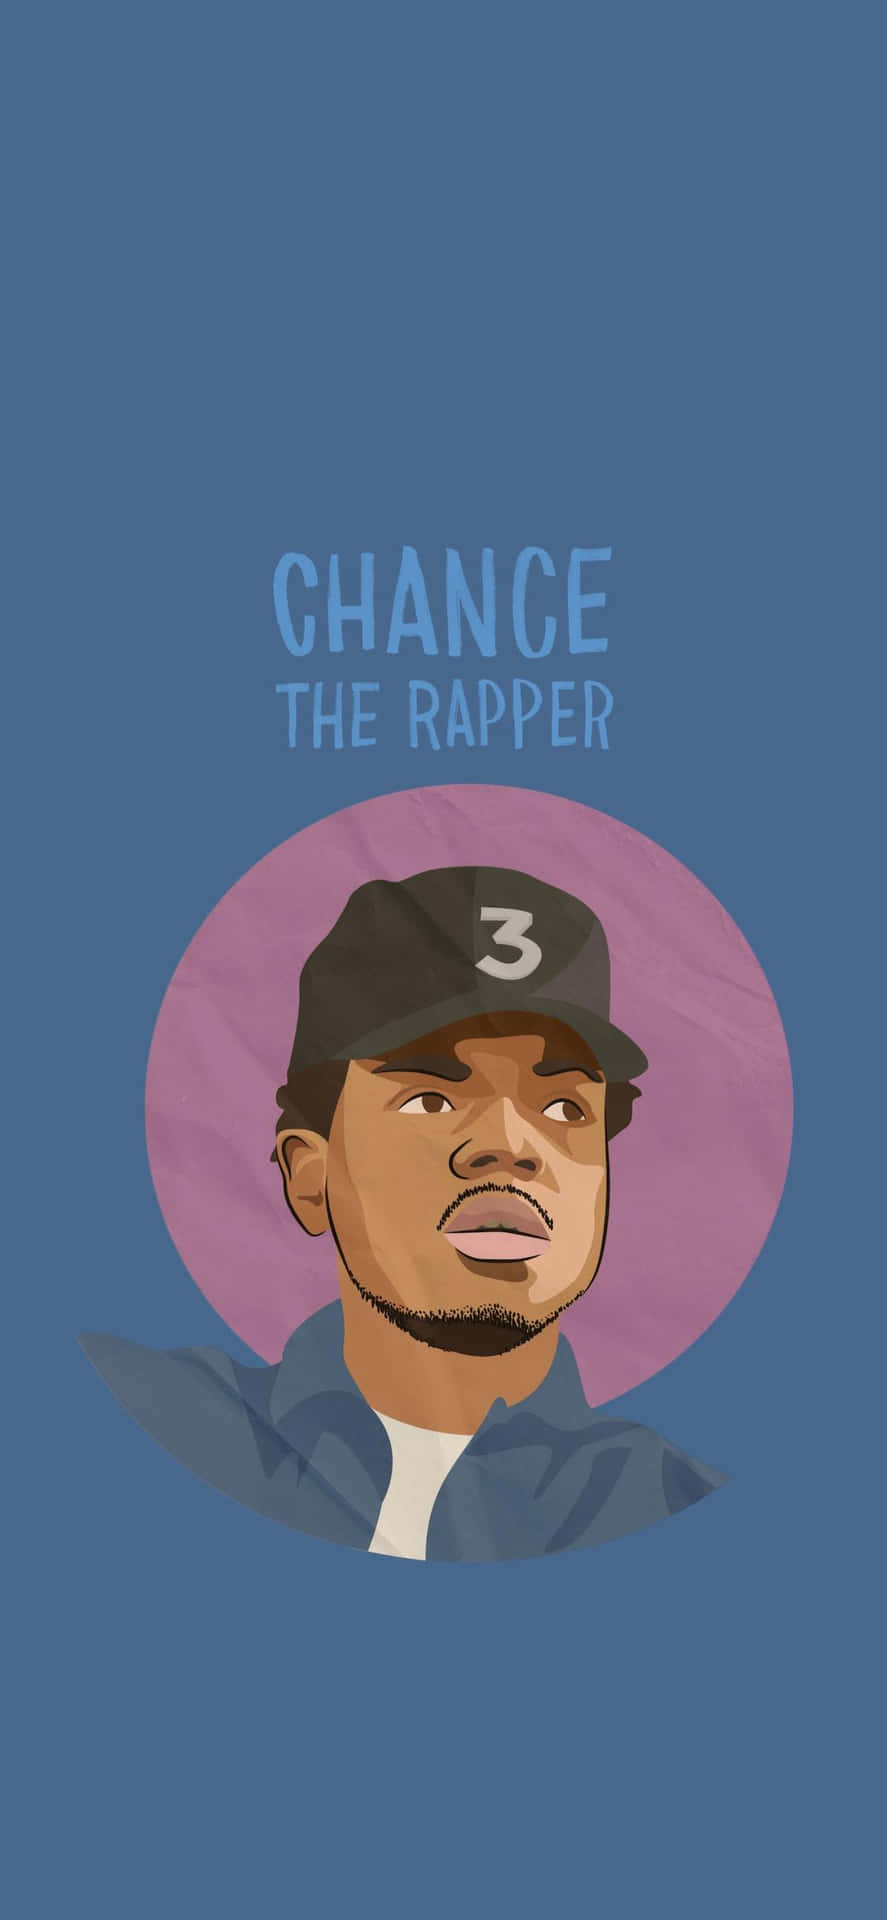 "Let the Cool Rapper take center stage!" Wallpaper